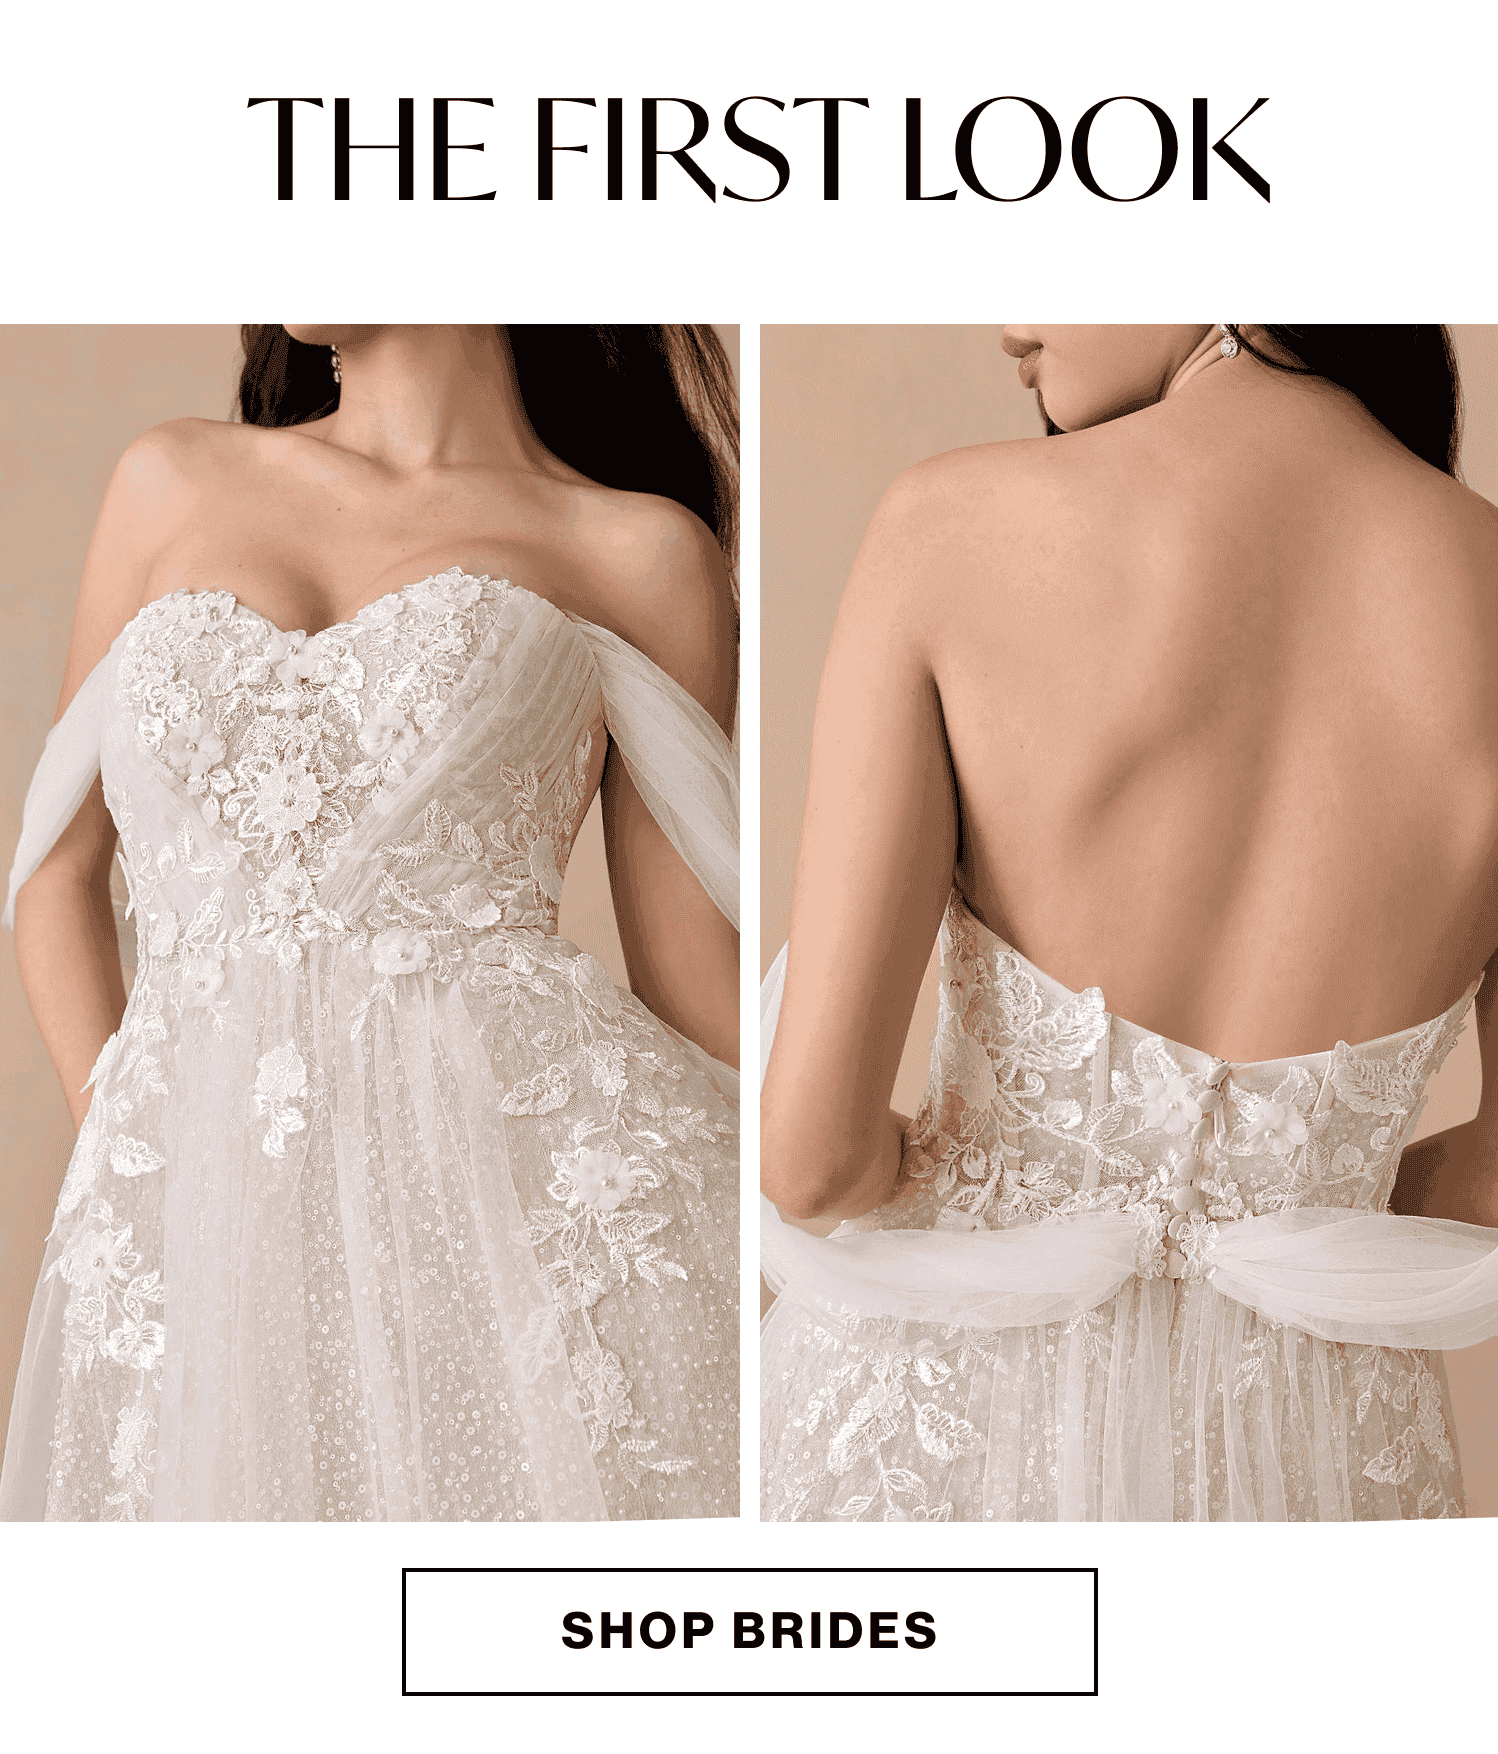 The First Look: Shop Brides